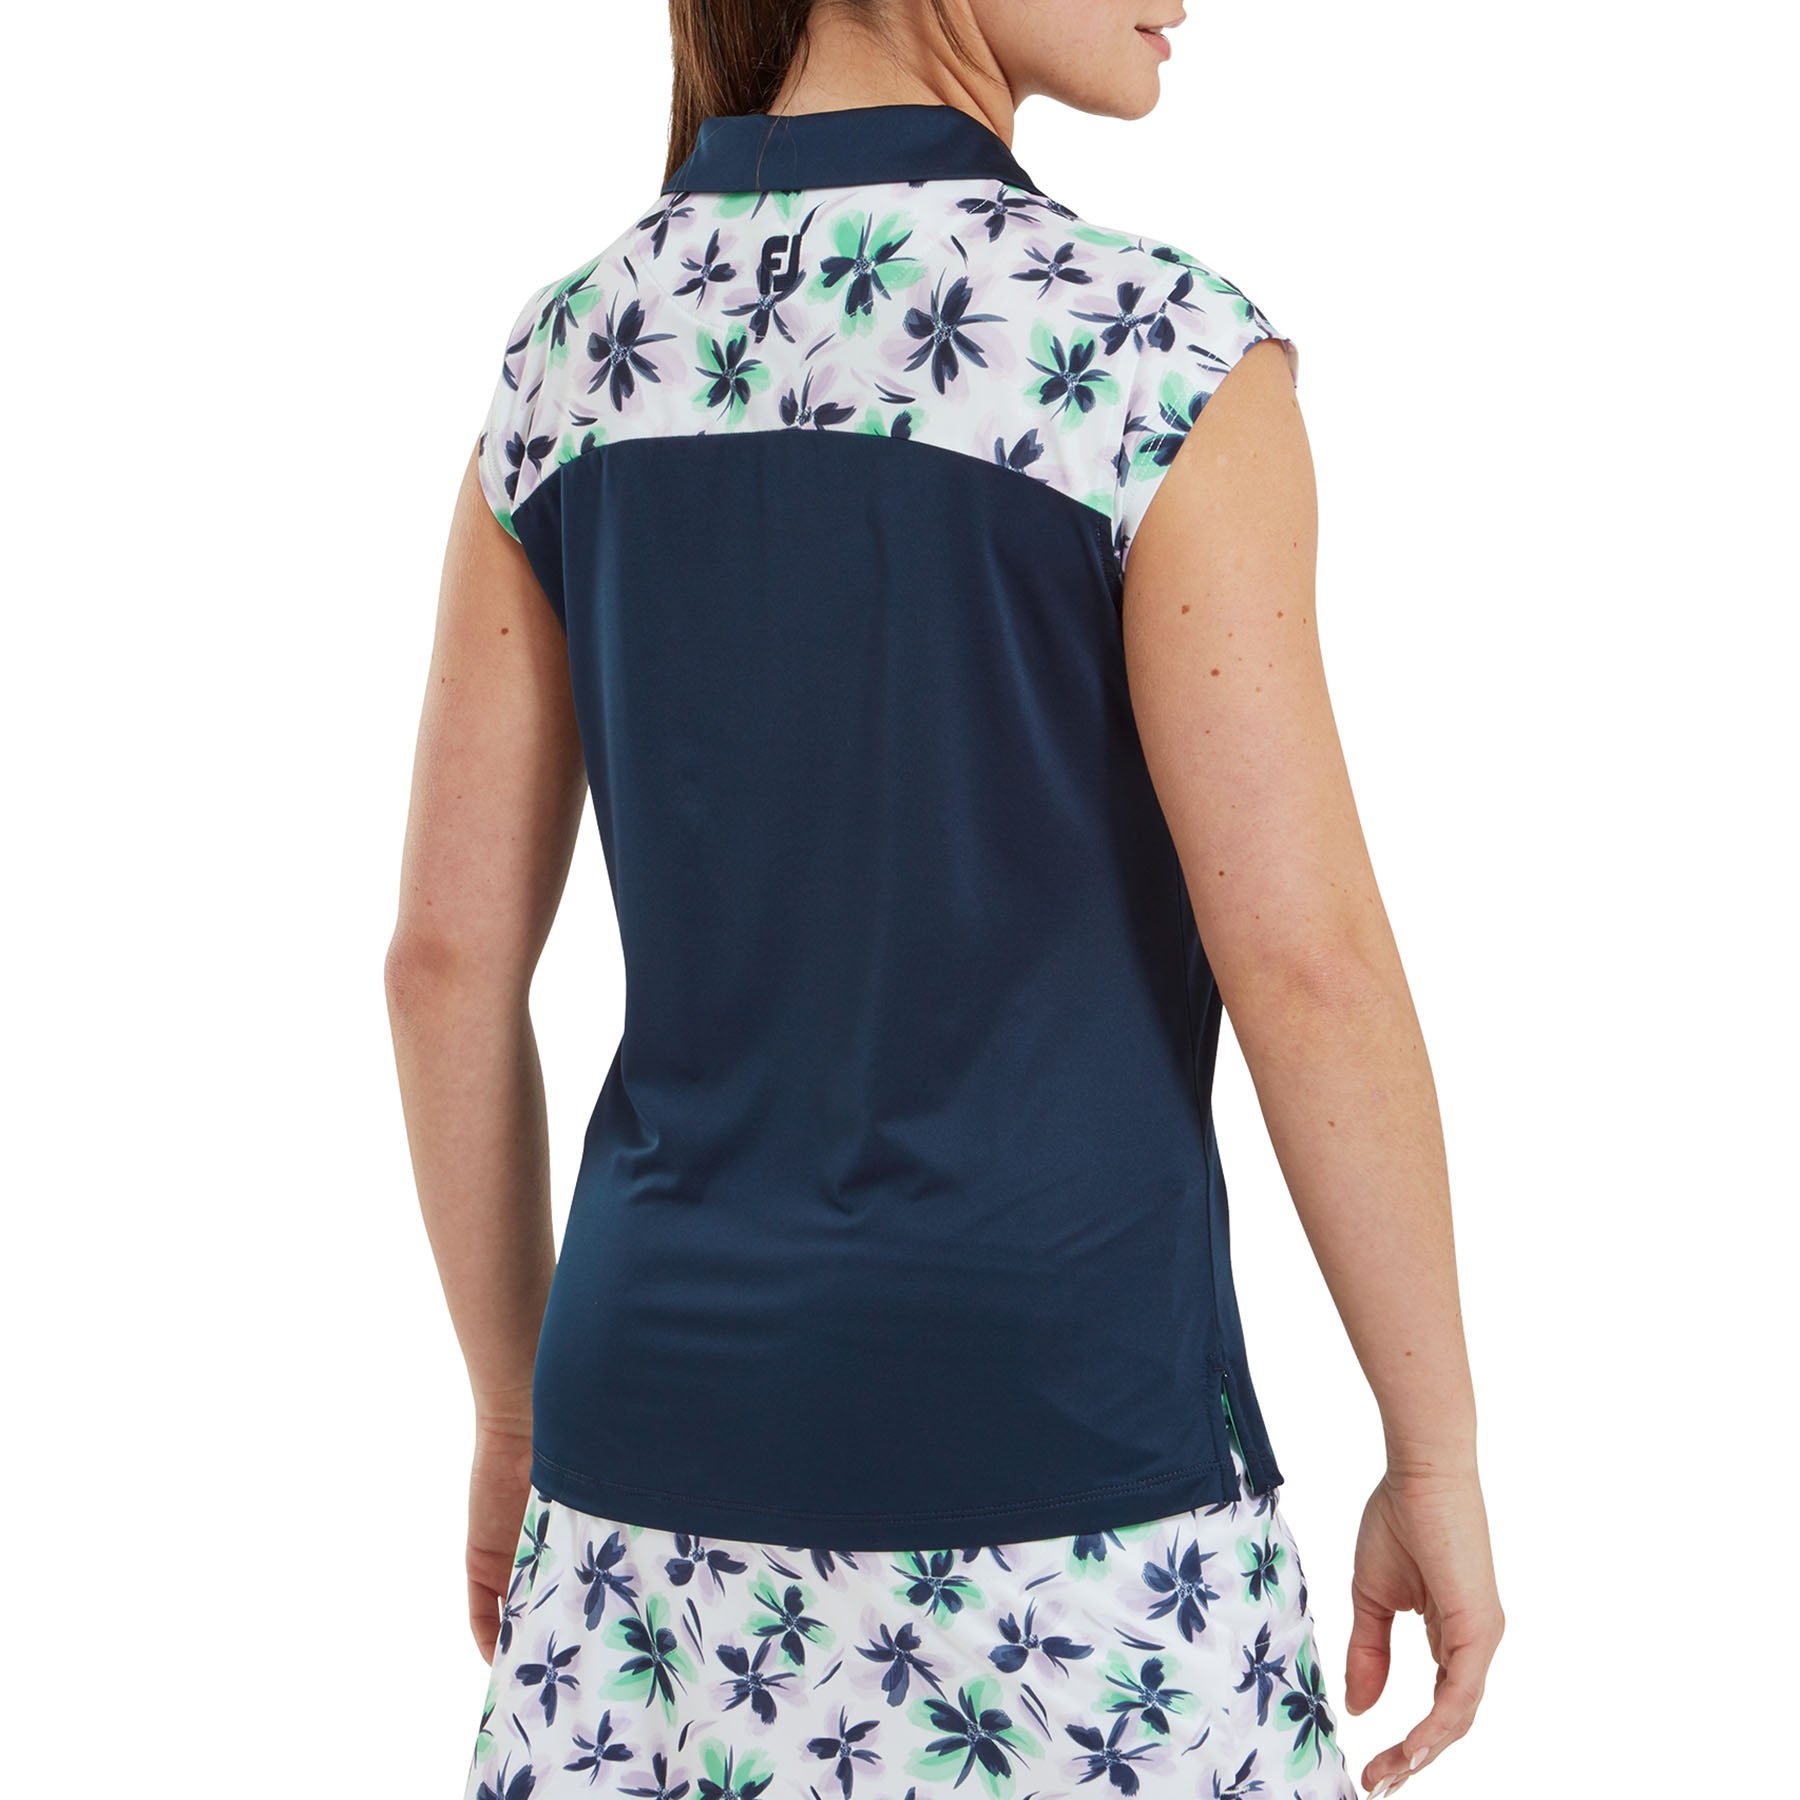 FootJoy Ladies Cap Sleeve Floral Print Panel Polo in Mint and Navy